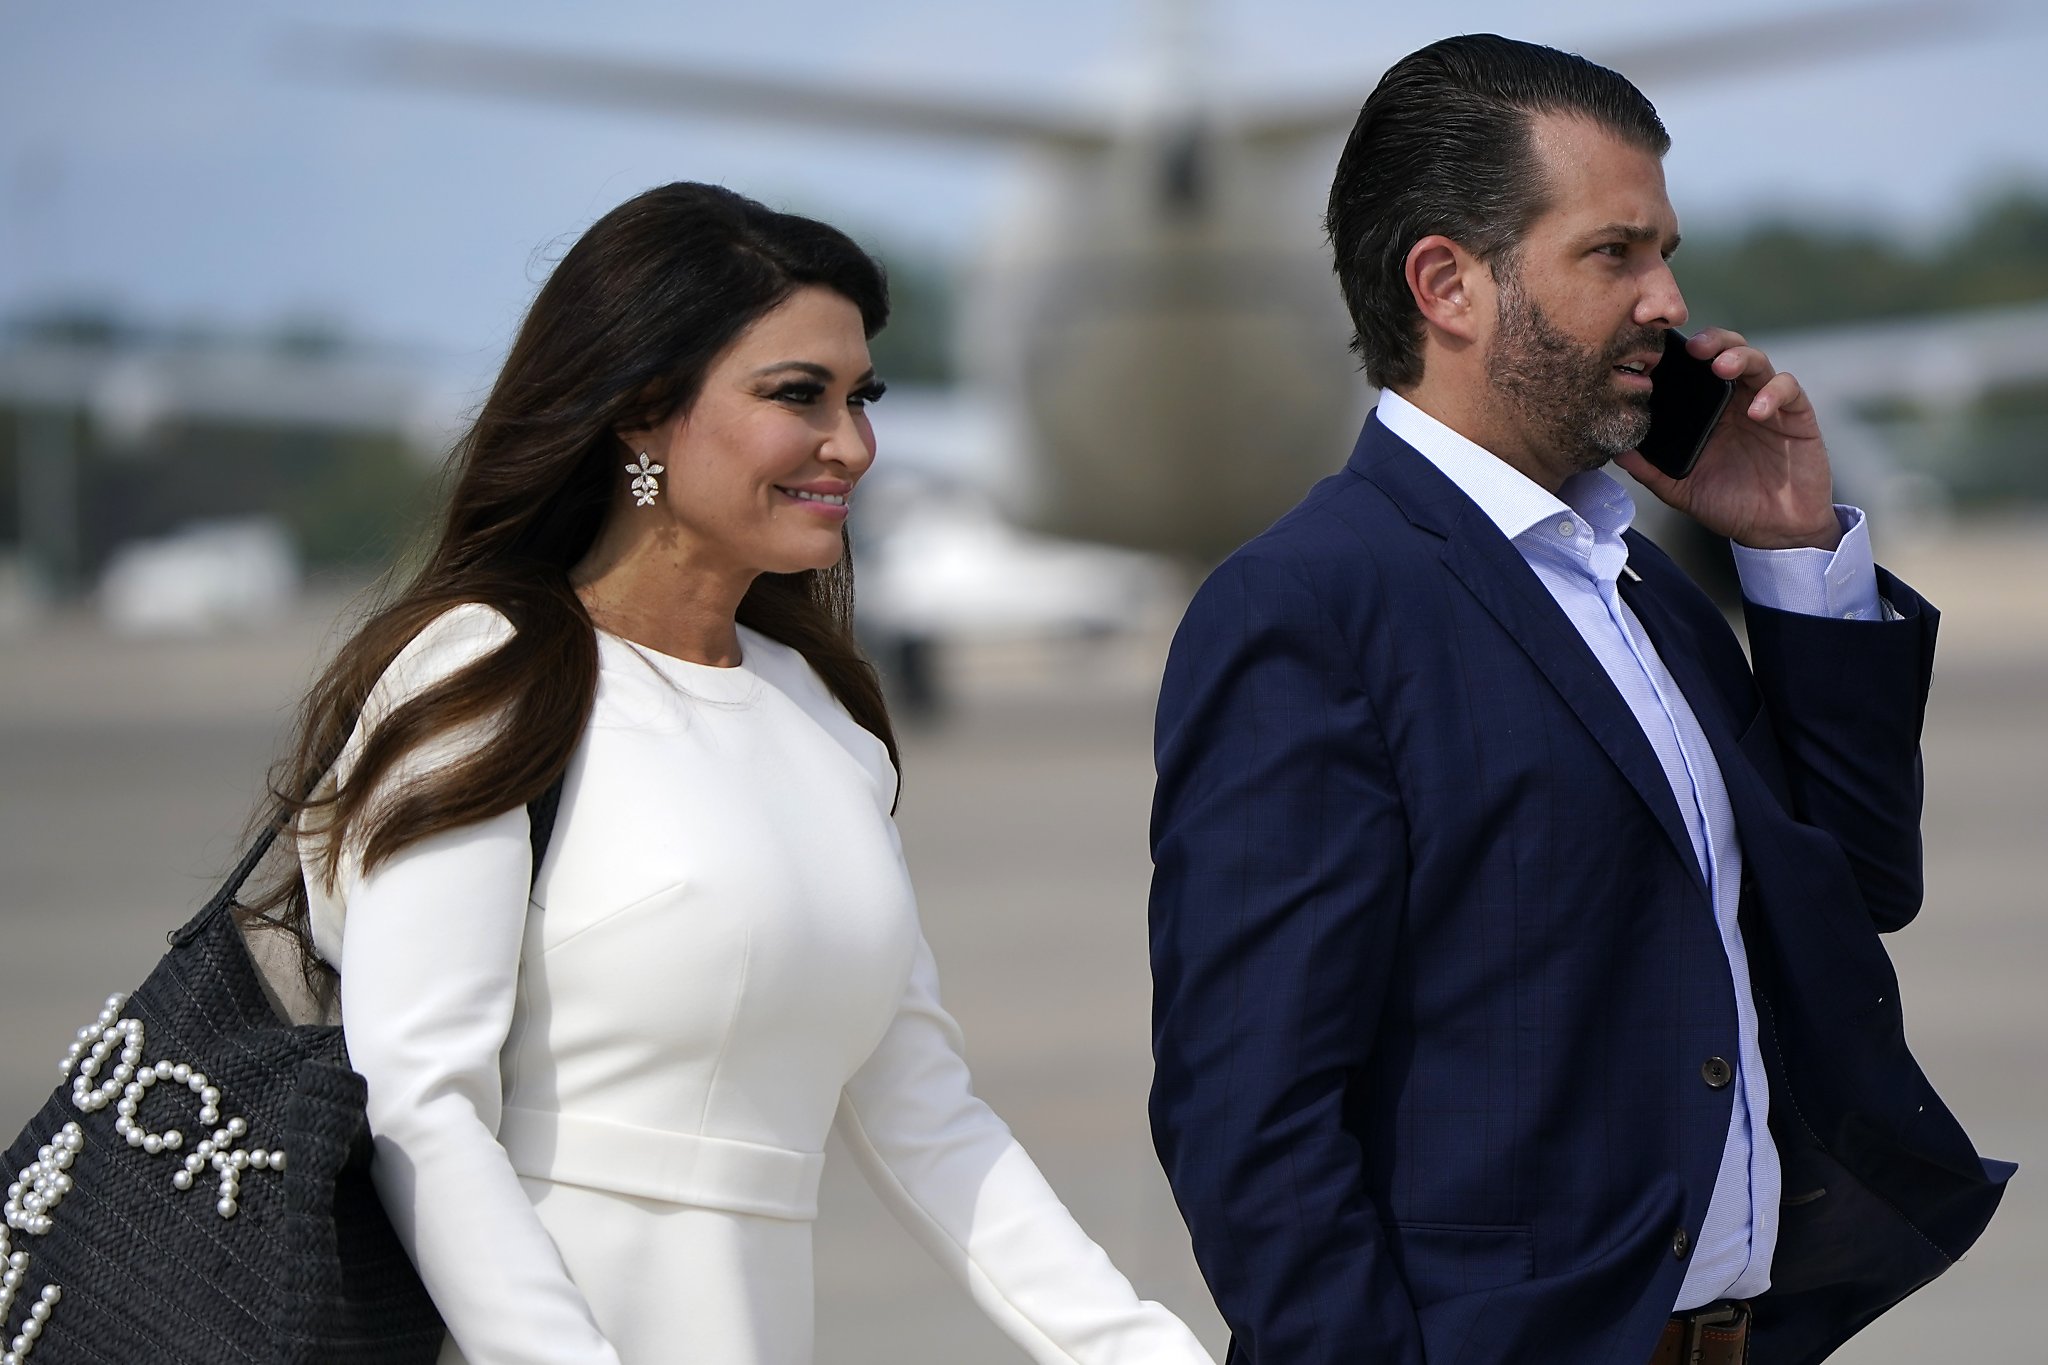 Book alleges bad Kimberly Guilfoyle behavior at GOP fundraisers